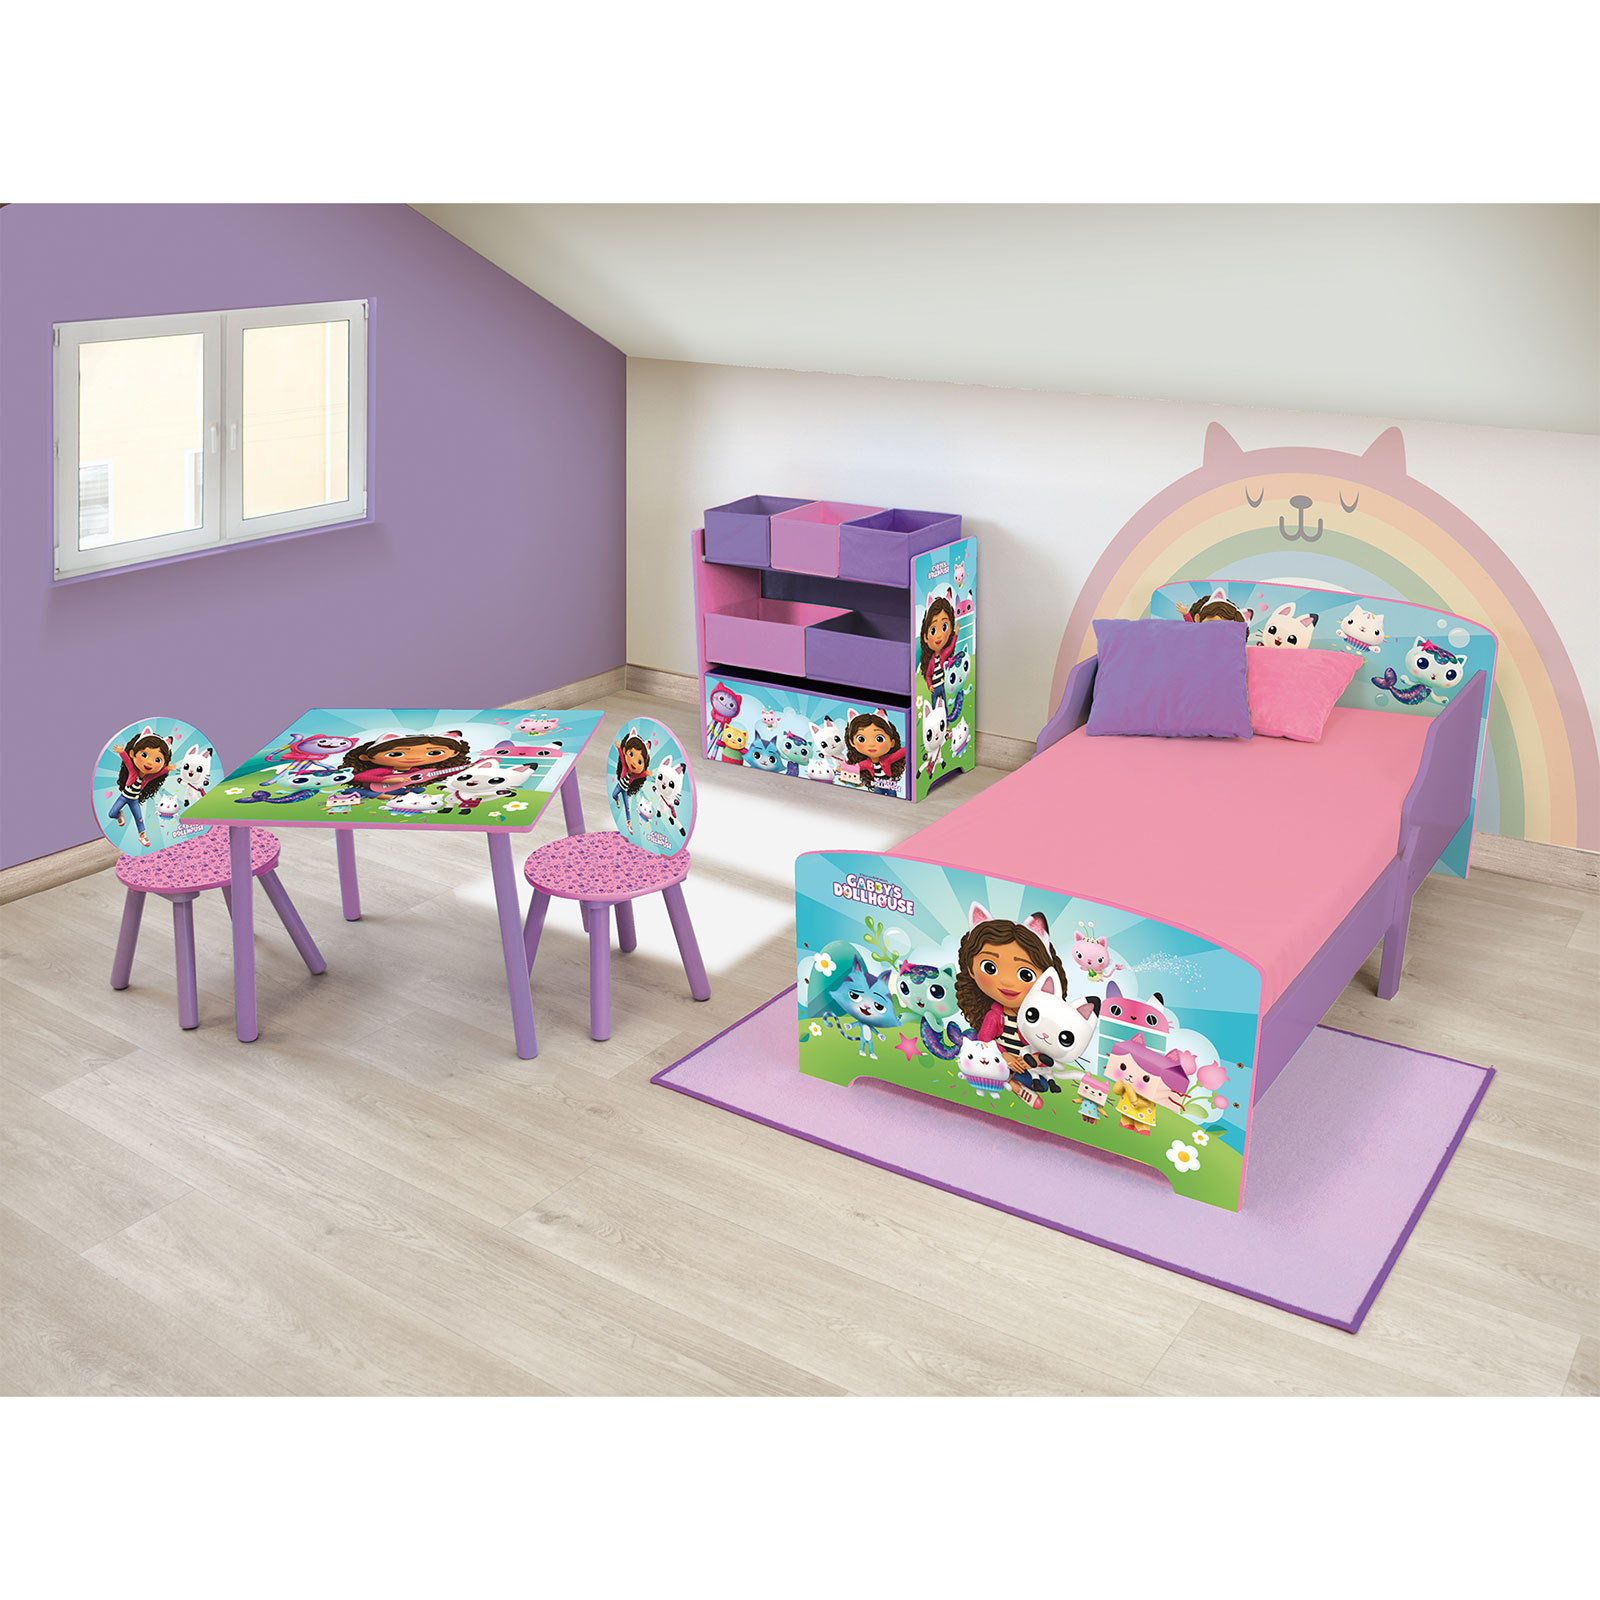 Gabby's Dollhouse Wooden Junior Toddler Bed, Toy Organiser and Table & Chairs Set – Purple